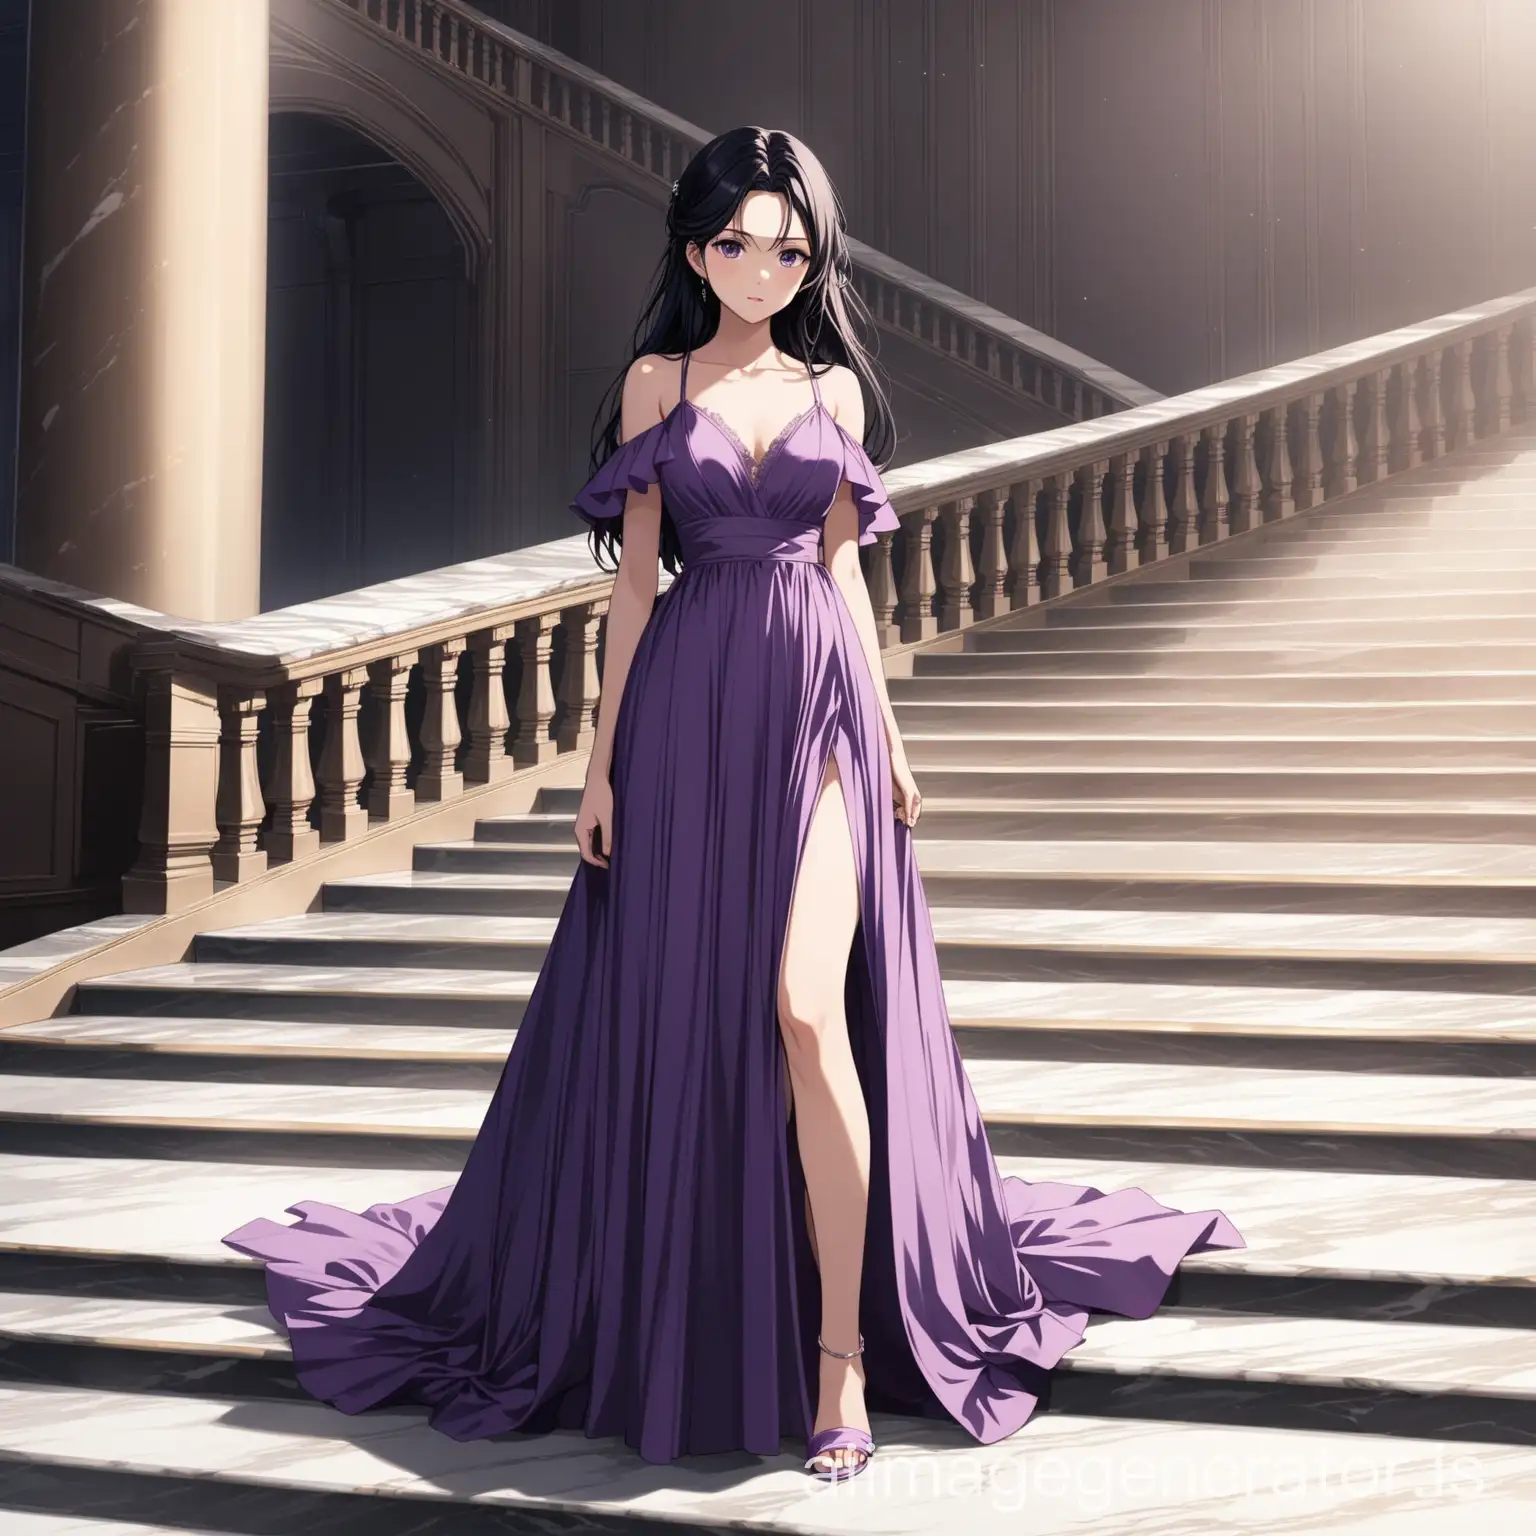 Elegant-Anime-Girl-in-Purple-Gown-on-Marble-Stairs